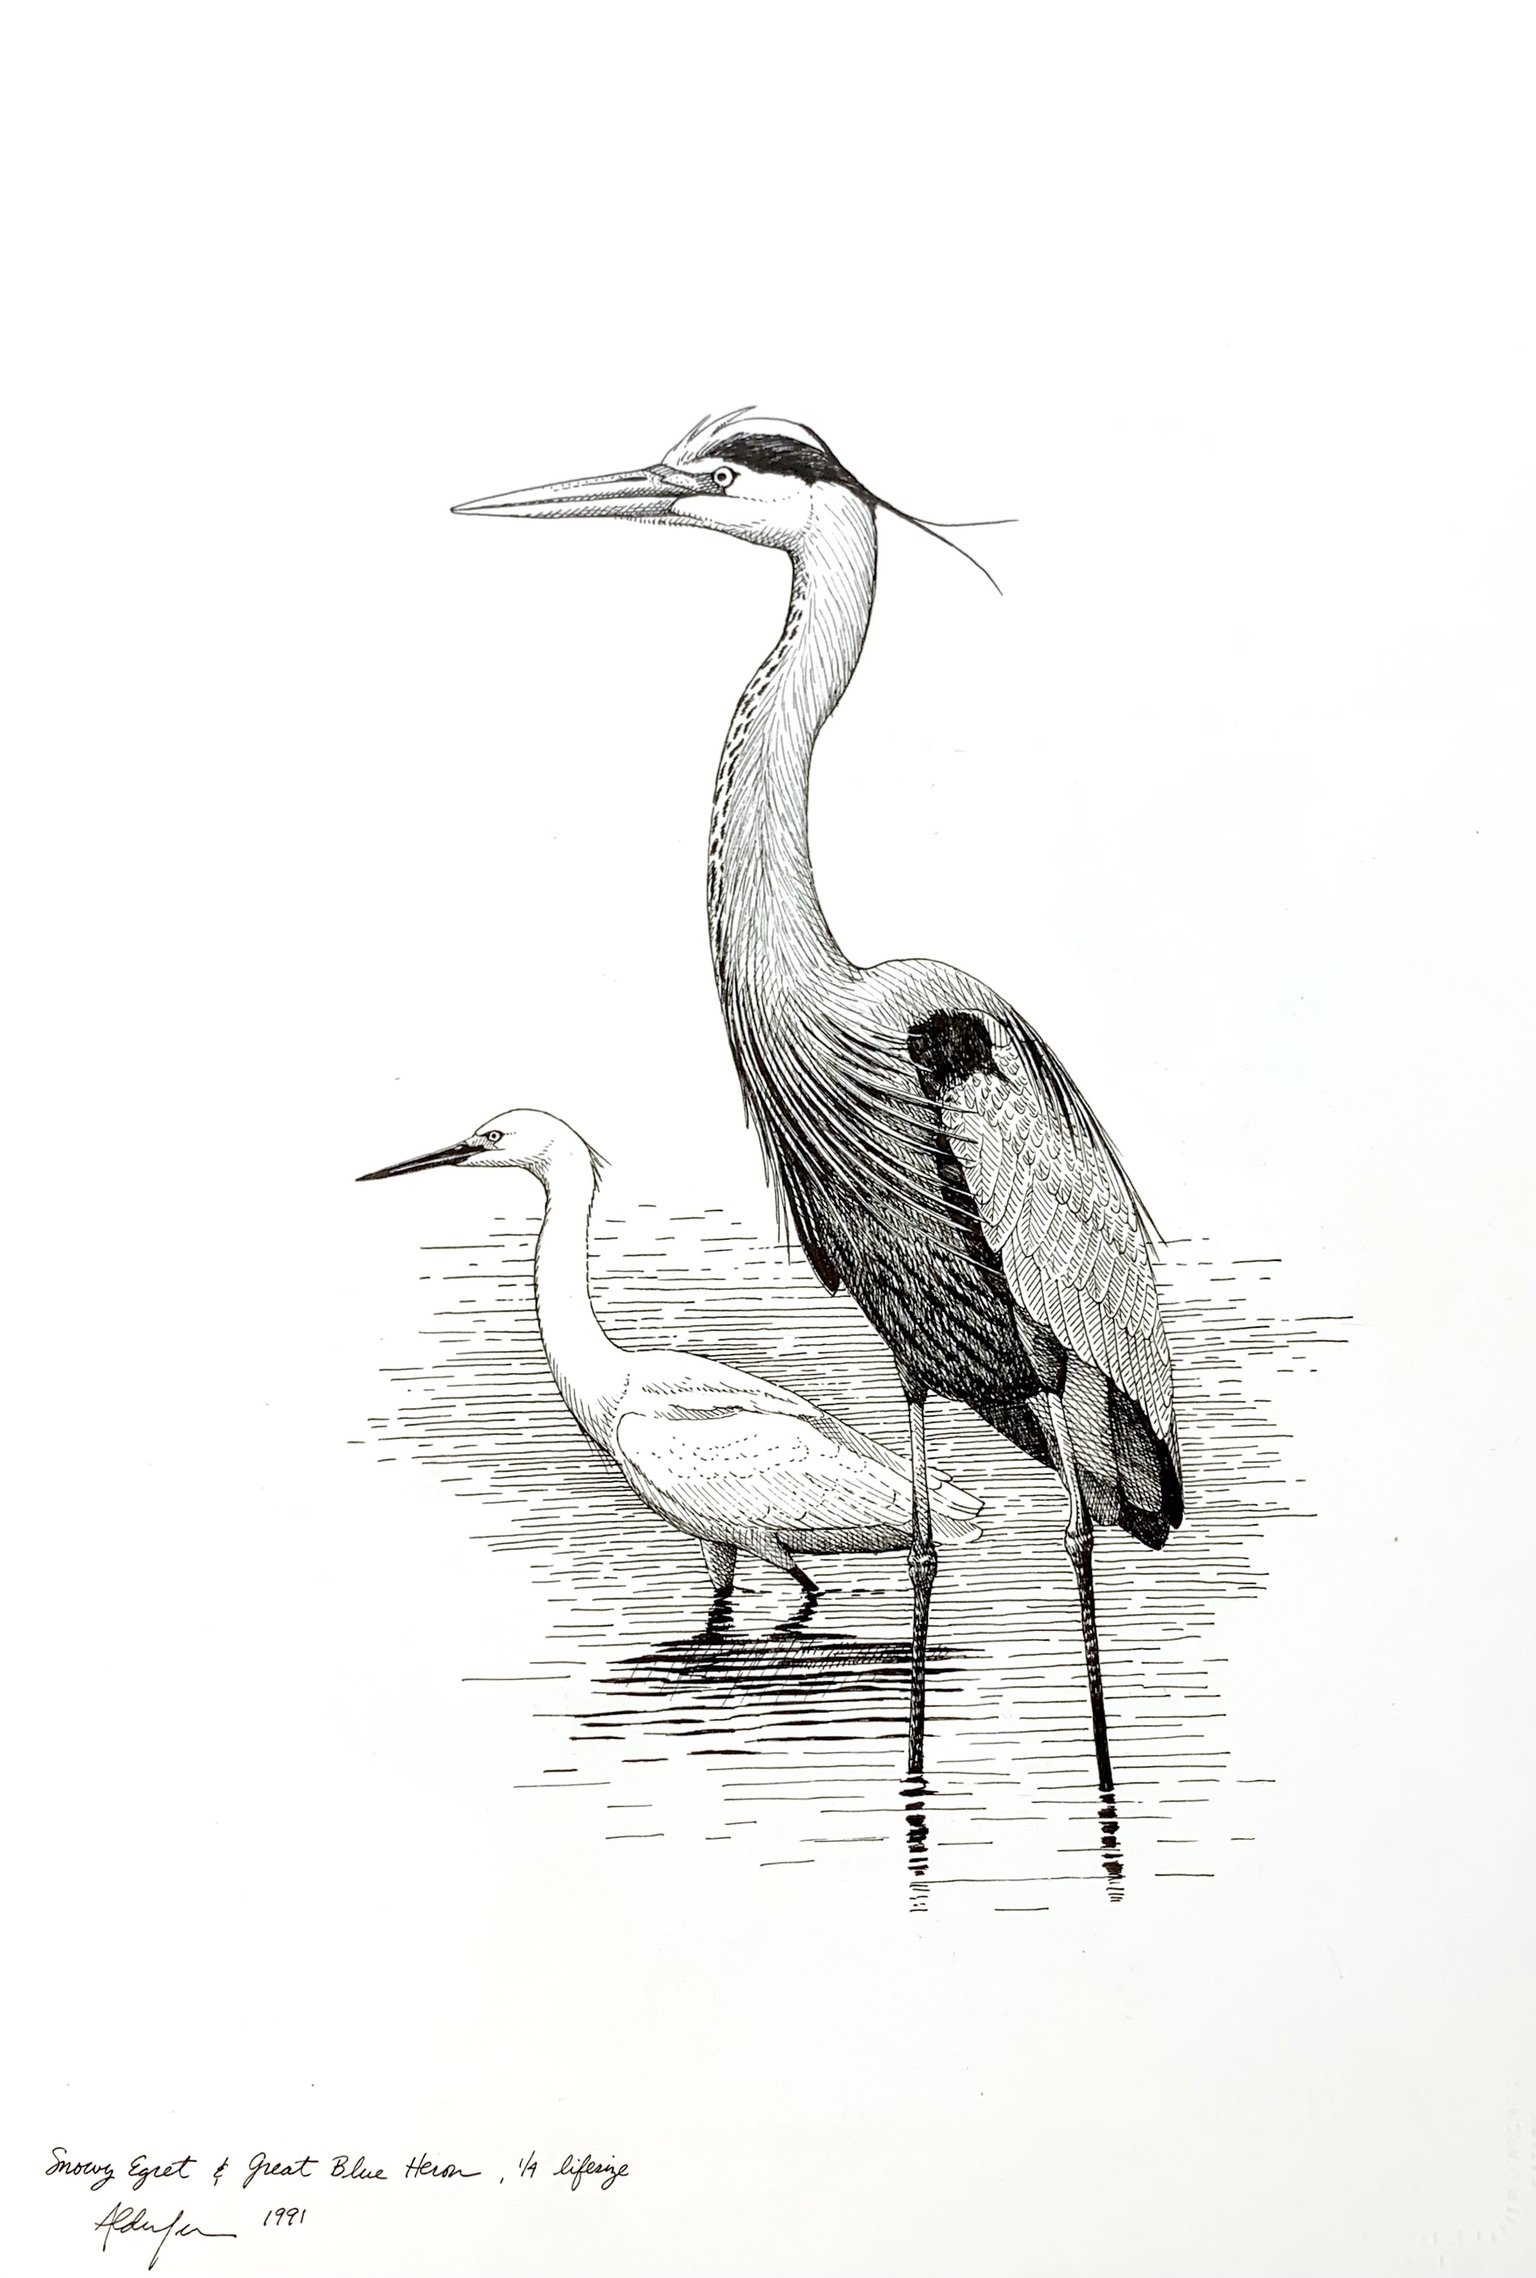 Snowy Egret and Great Blue Heron, 1991  (Copy)